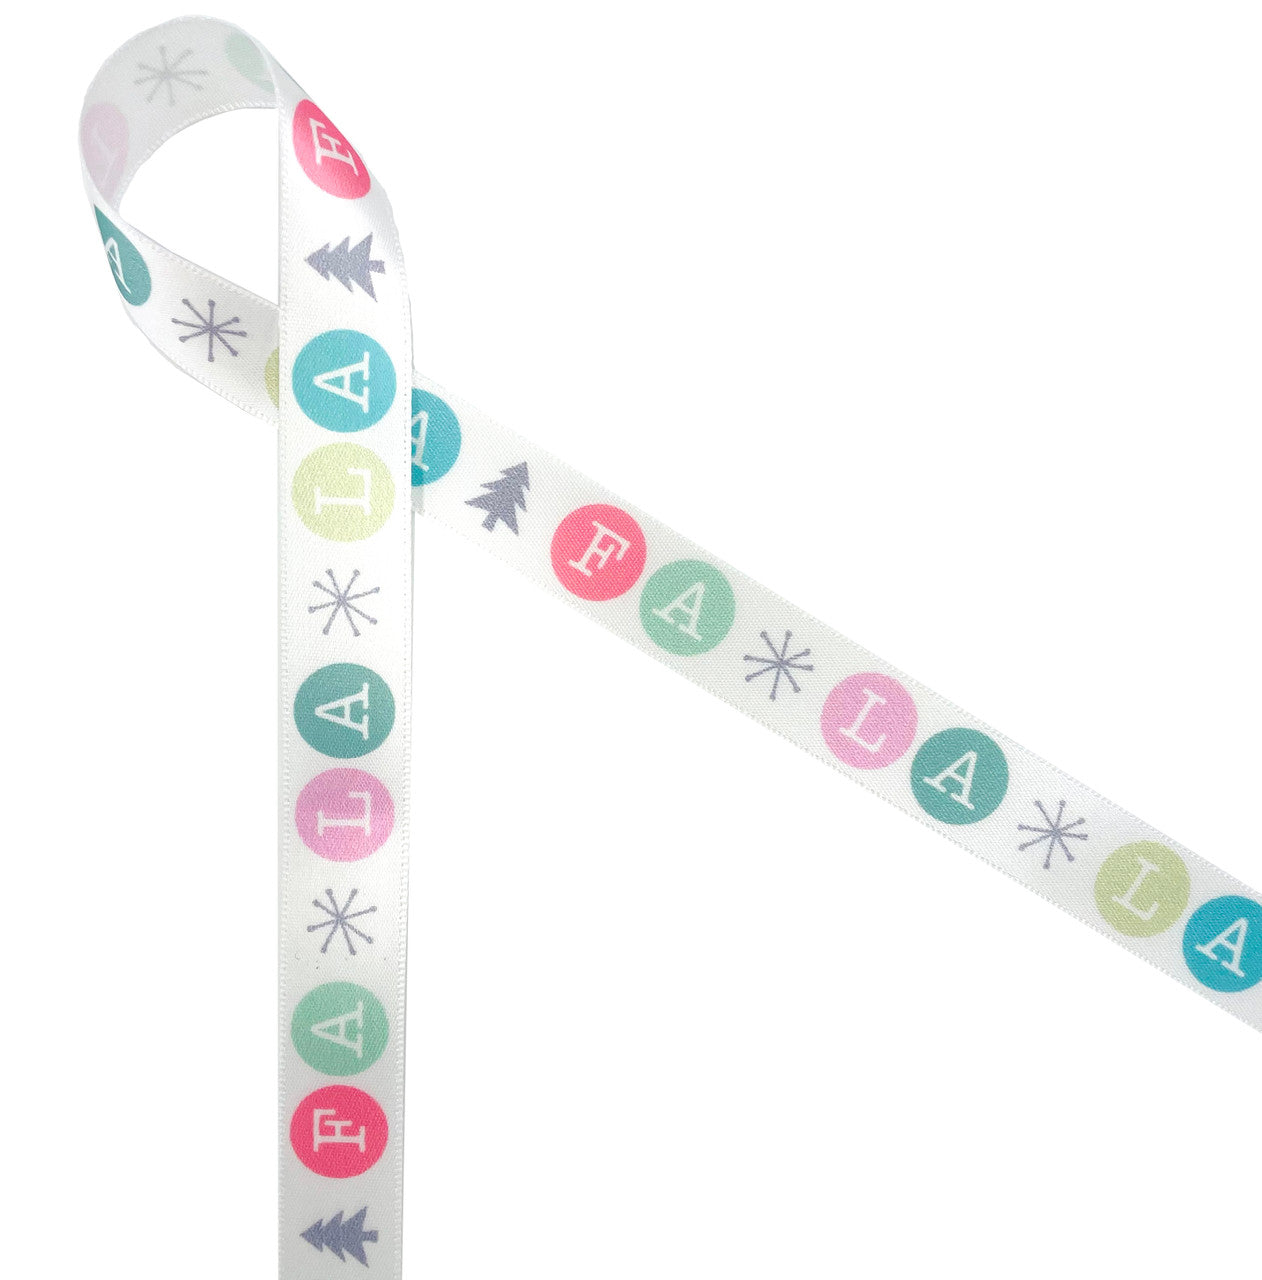 Fa La La in white on pastel dots of pink, mint and blue with a mid century star printed on 5/8" white single face satin ribbon is a fun addition to any holiday gift, favor or craft project. This fun ribbon is ideal for cookies, candy, cake pops, table decor and tree trimming. Be sure to have this ribbon on hand for Holiday crafts and sewing projects too. All our ribbon is designed and printed in the USA